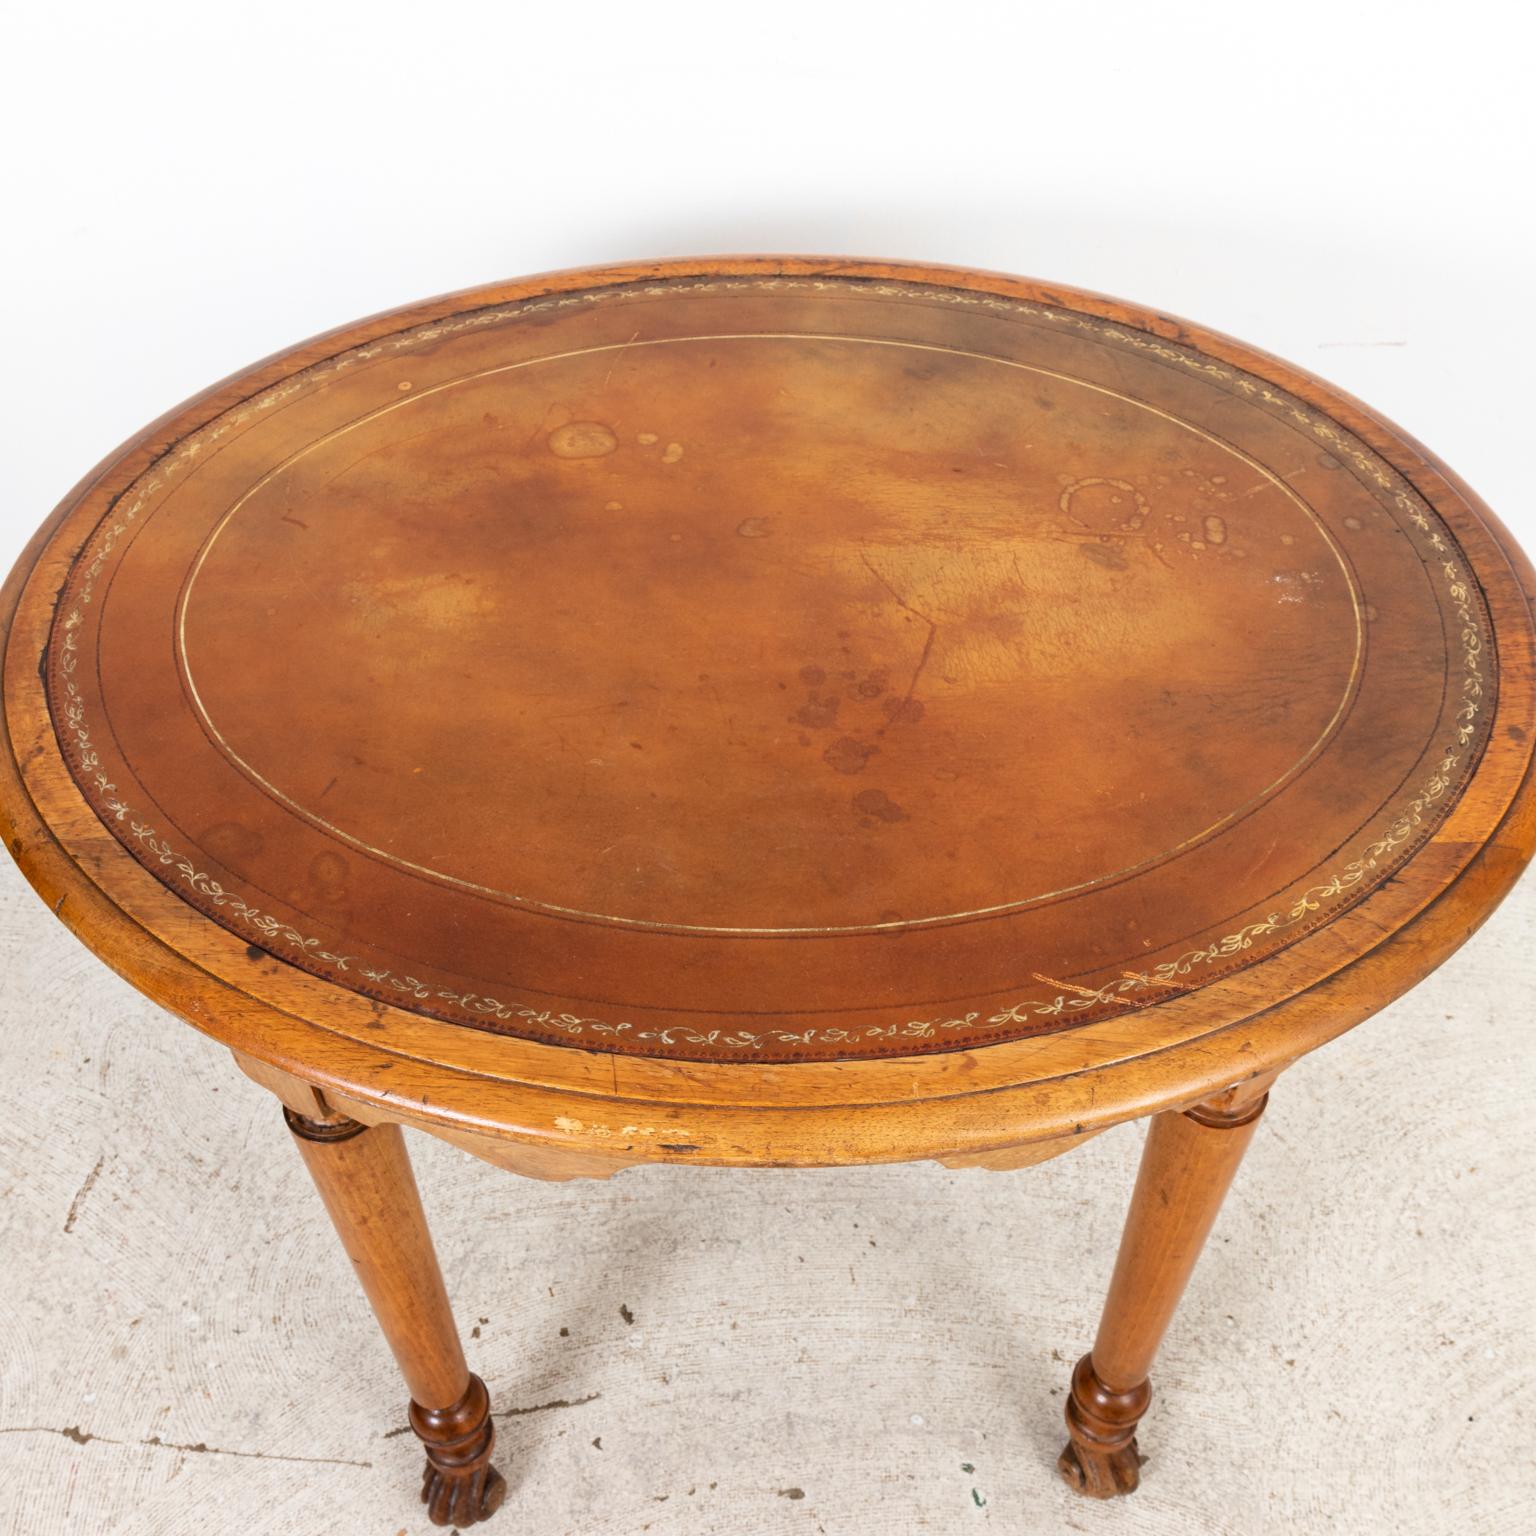 Circa 1920s English oval oakwood table with foliage trim on the embossed leather top. The table also featured a curved apron, ball turned legs, and Flemish scroll feet. Made in England. Please note of wear consistent with age including finish loss